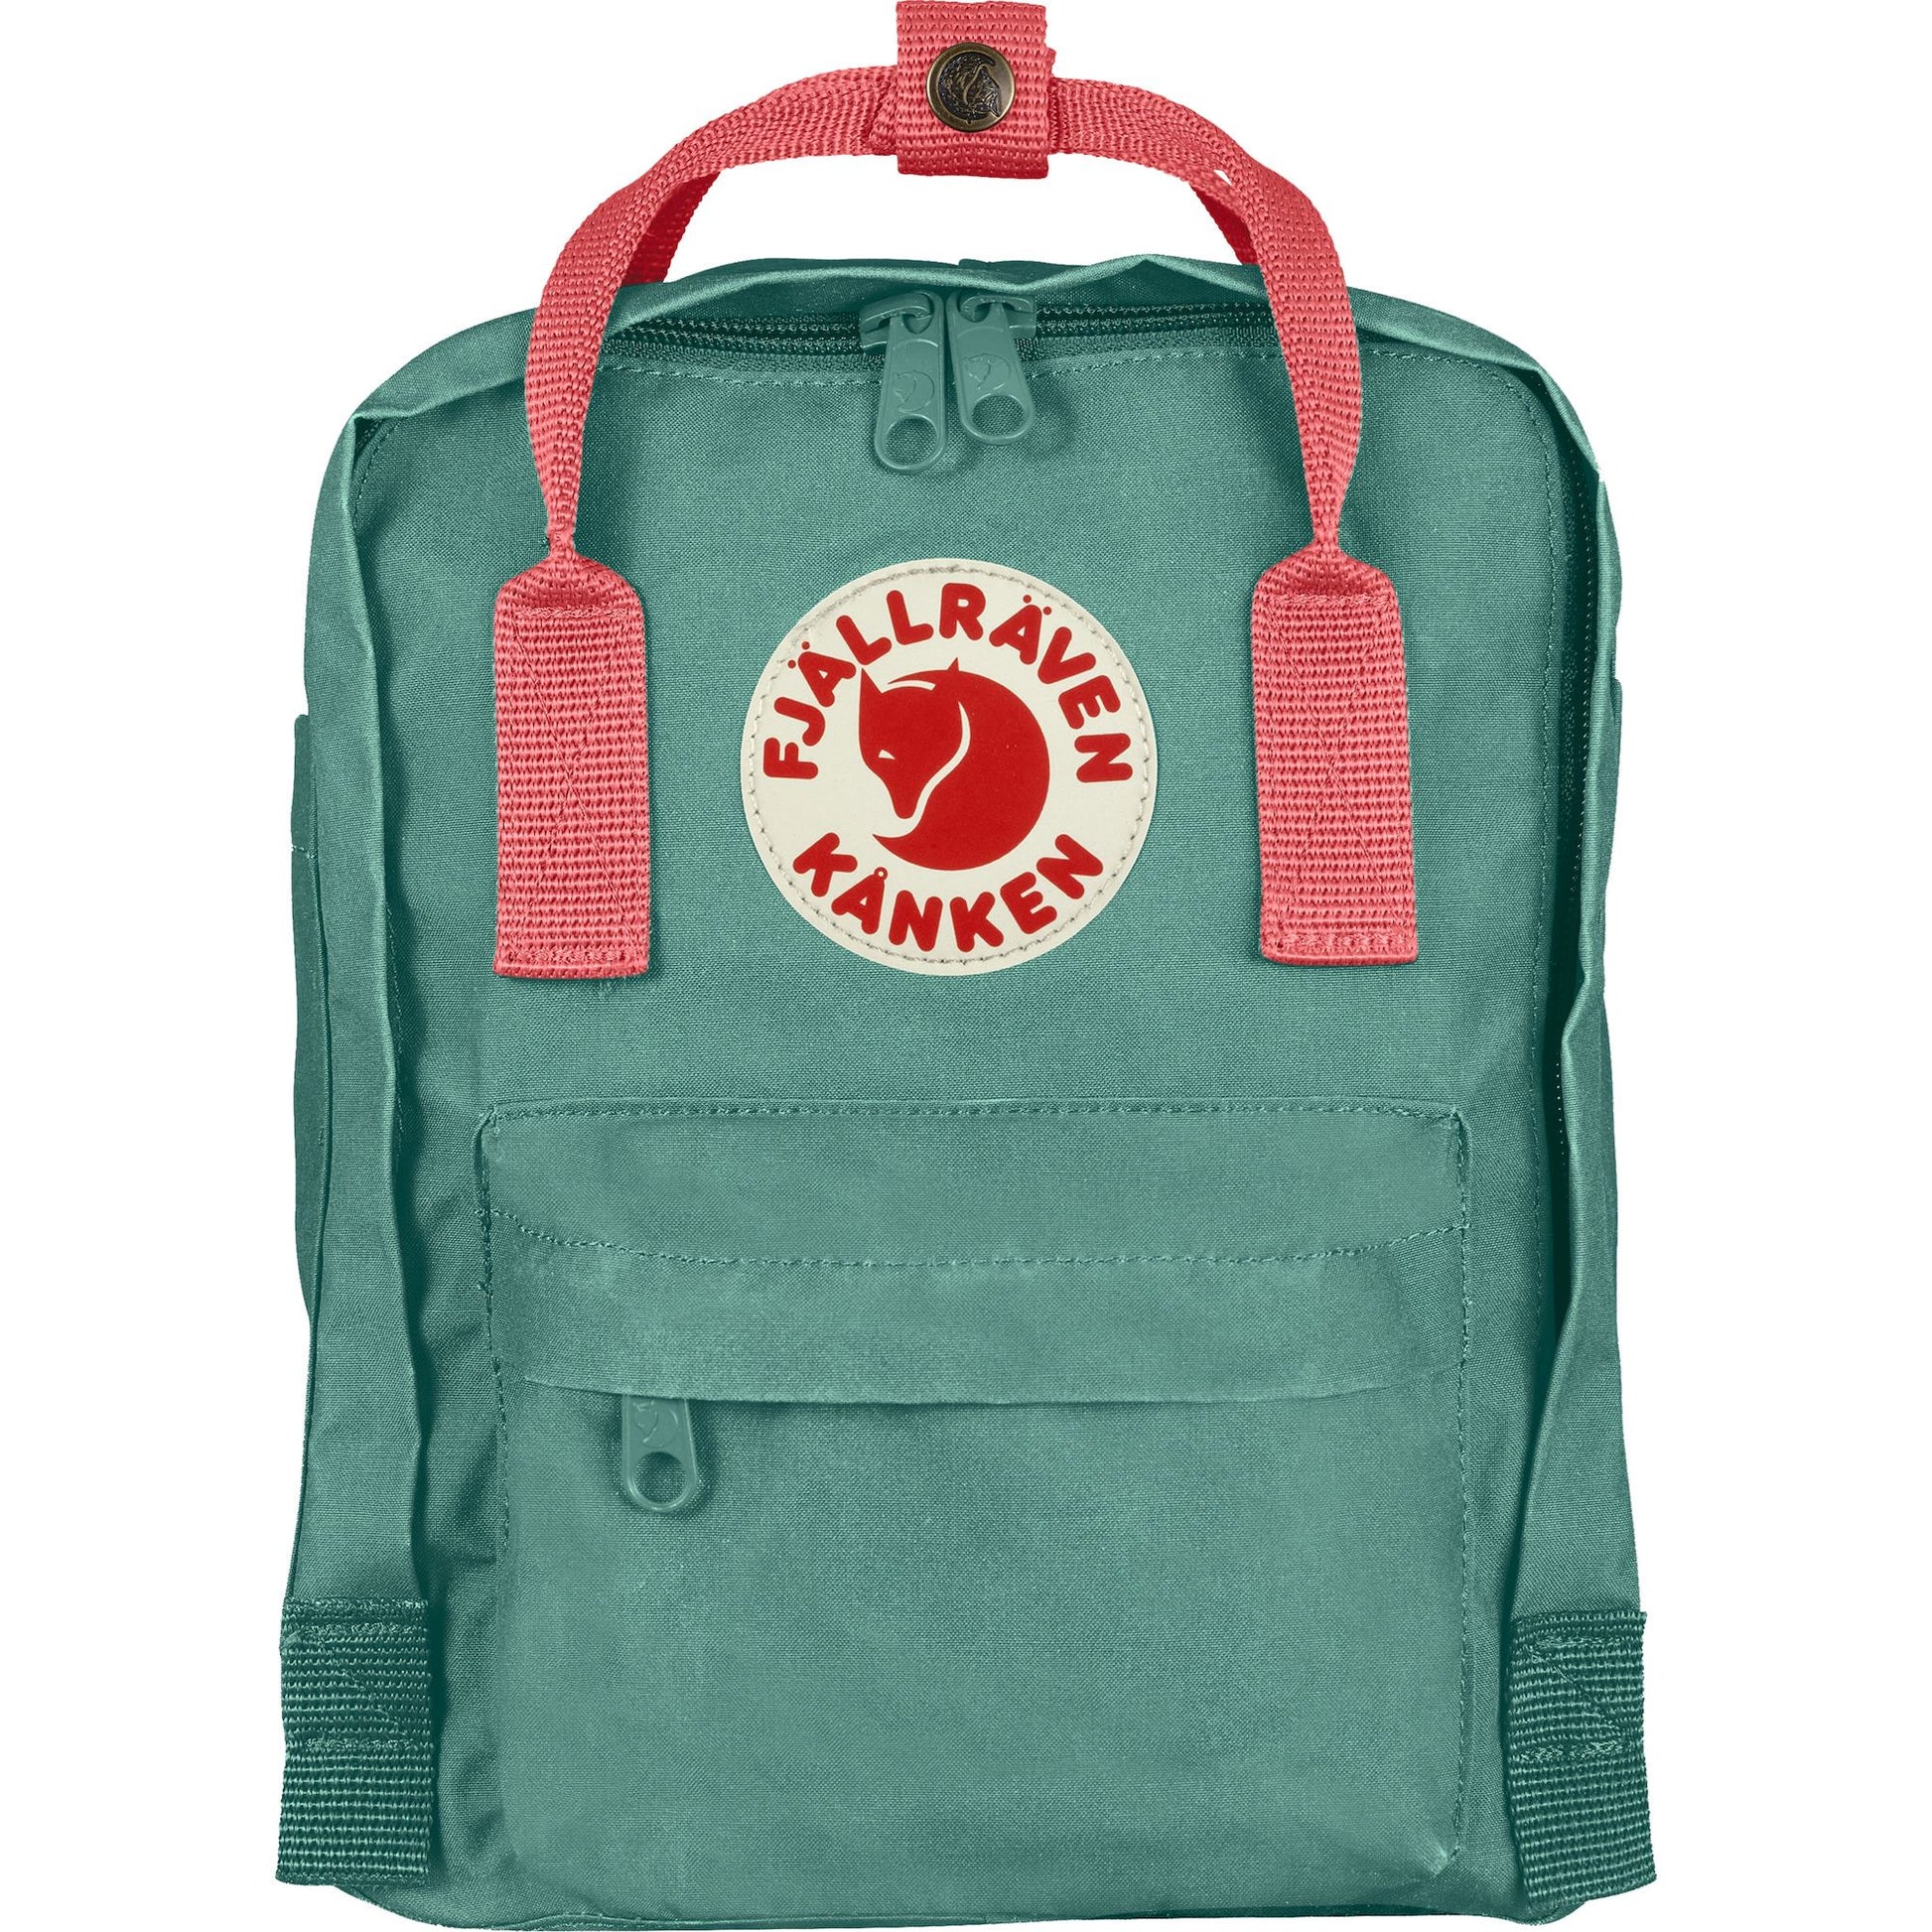 Sage green mini backpack with coral pink straps